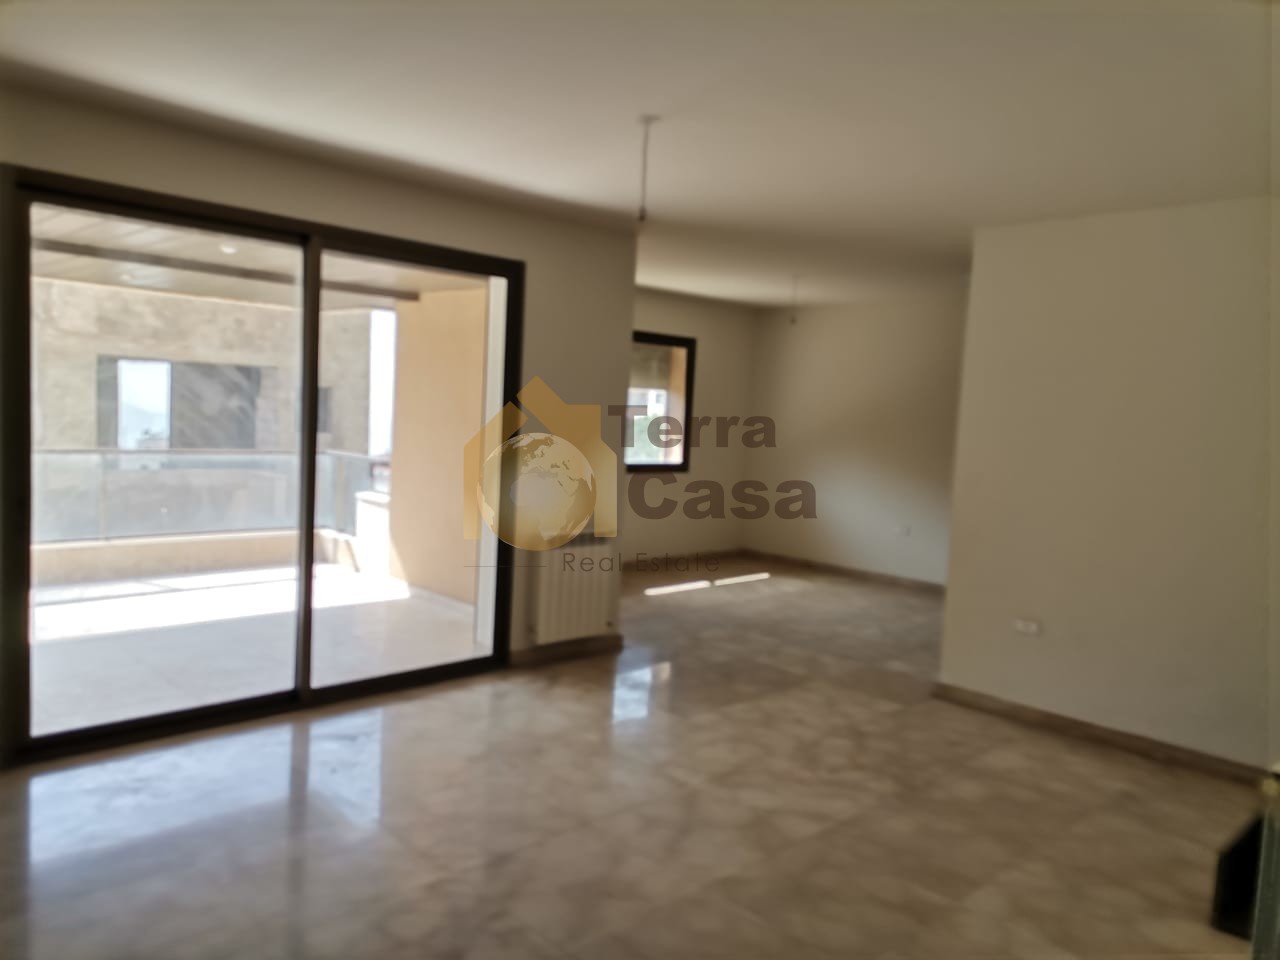 Brand new apartment for sale .Ref# 2546